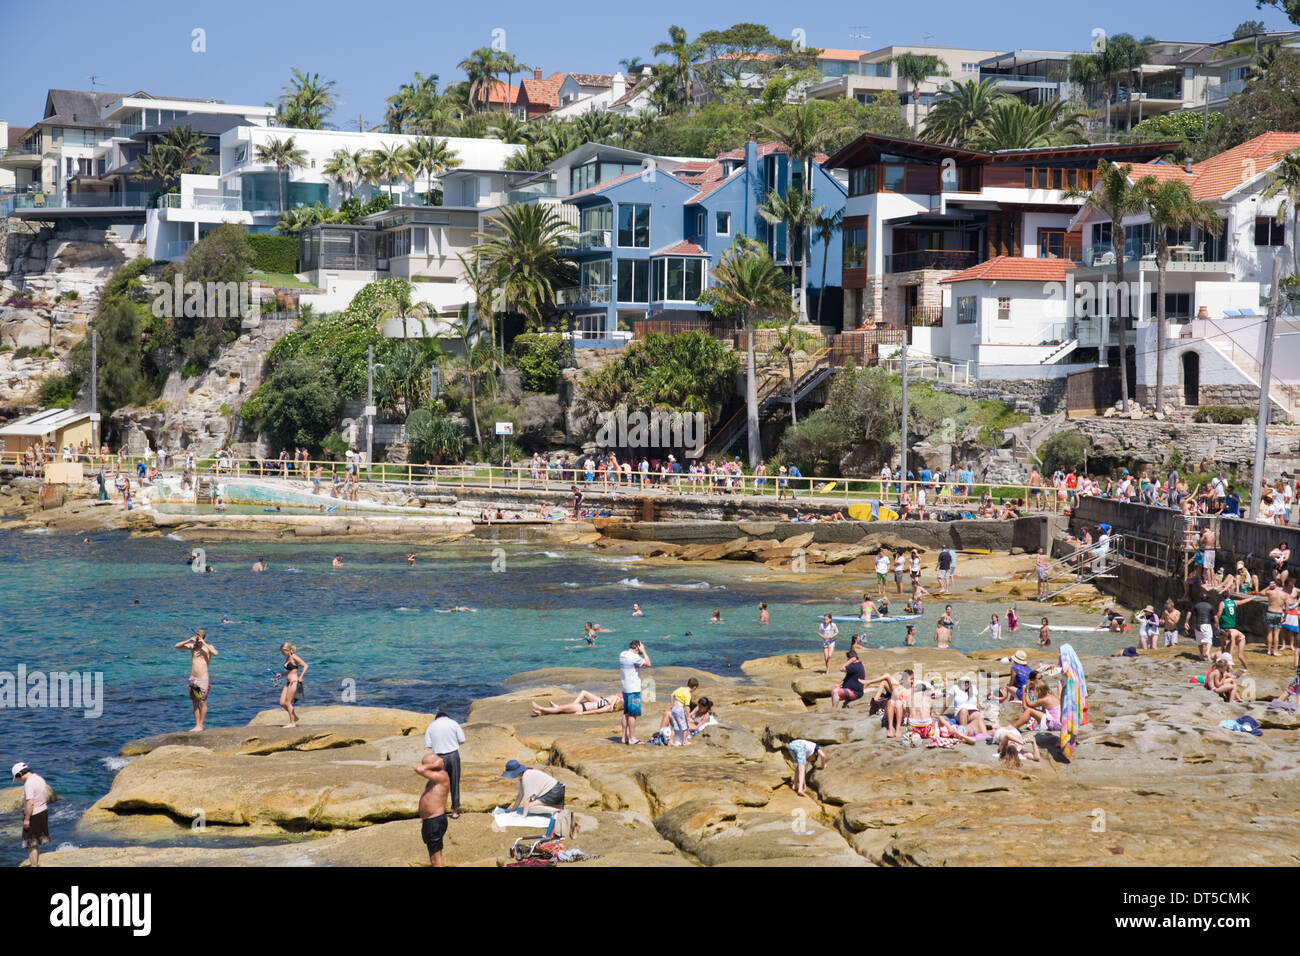 people enjoying summer at Fairy Bower, an area in Sydney between manly and shelly beach, new south wales, australia Stock Photo